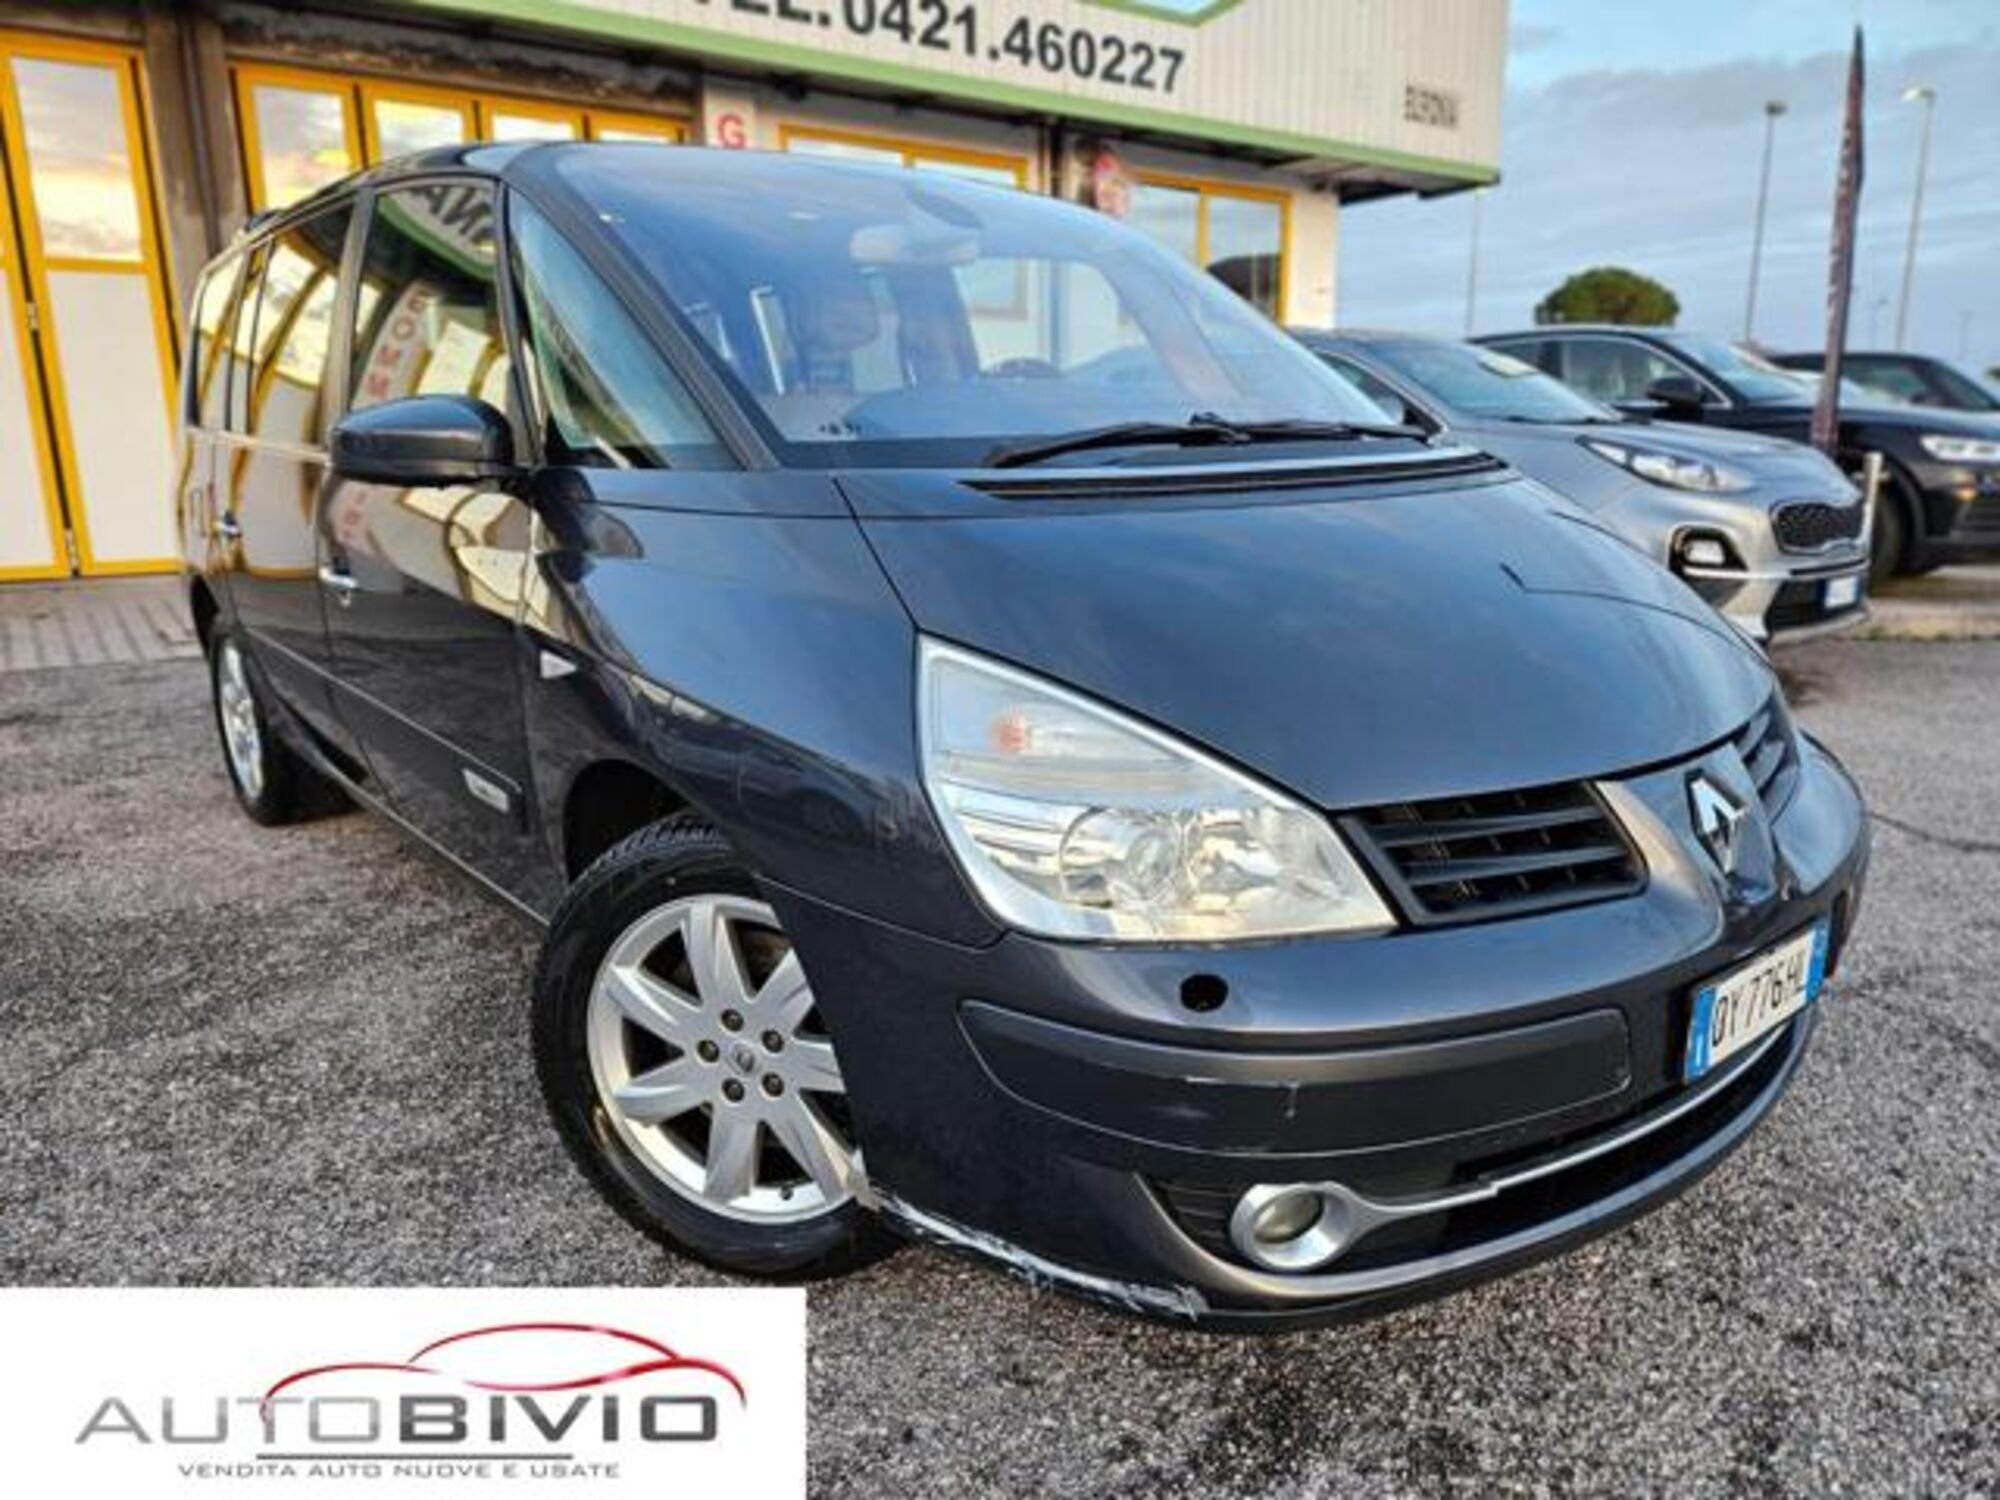 Renault Grand Espace 2.0 dCi 175CV Proactive Style